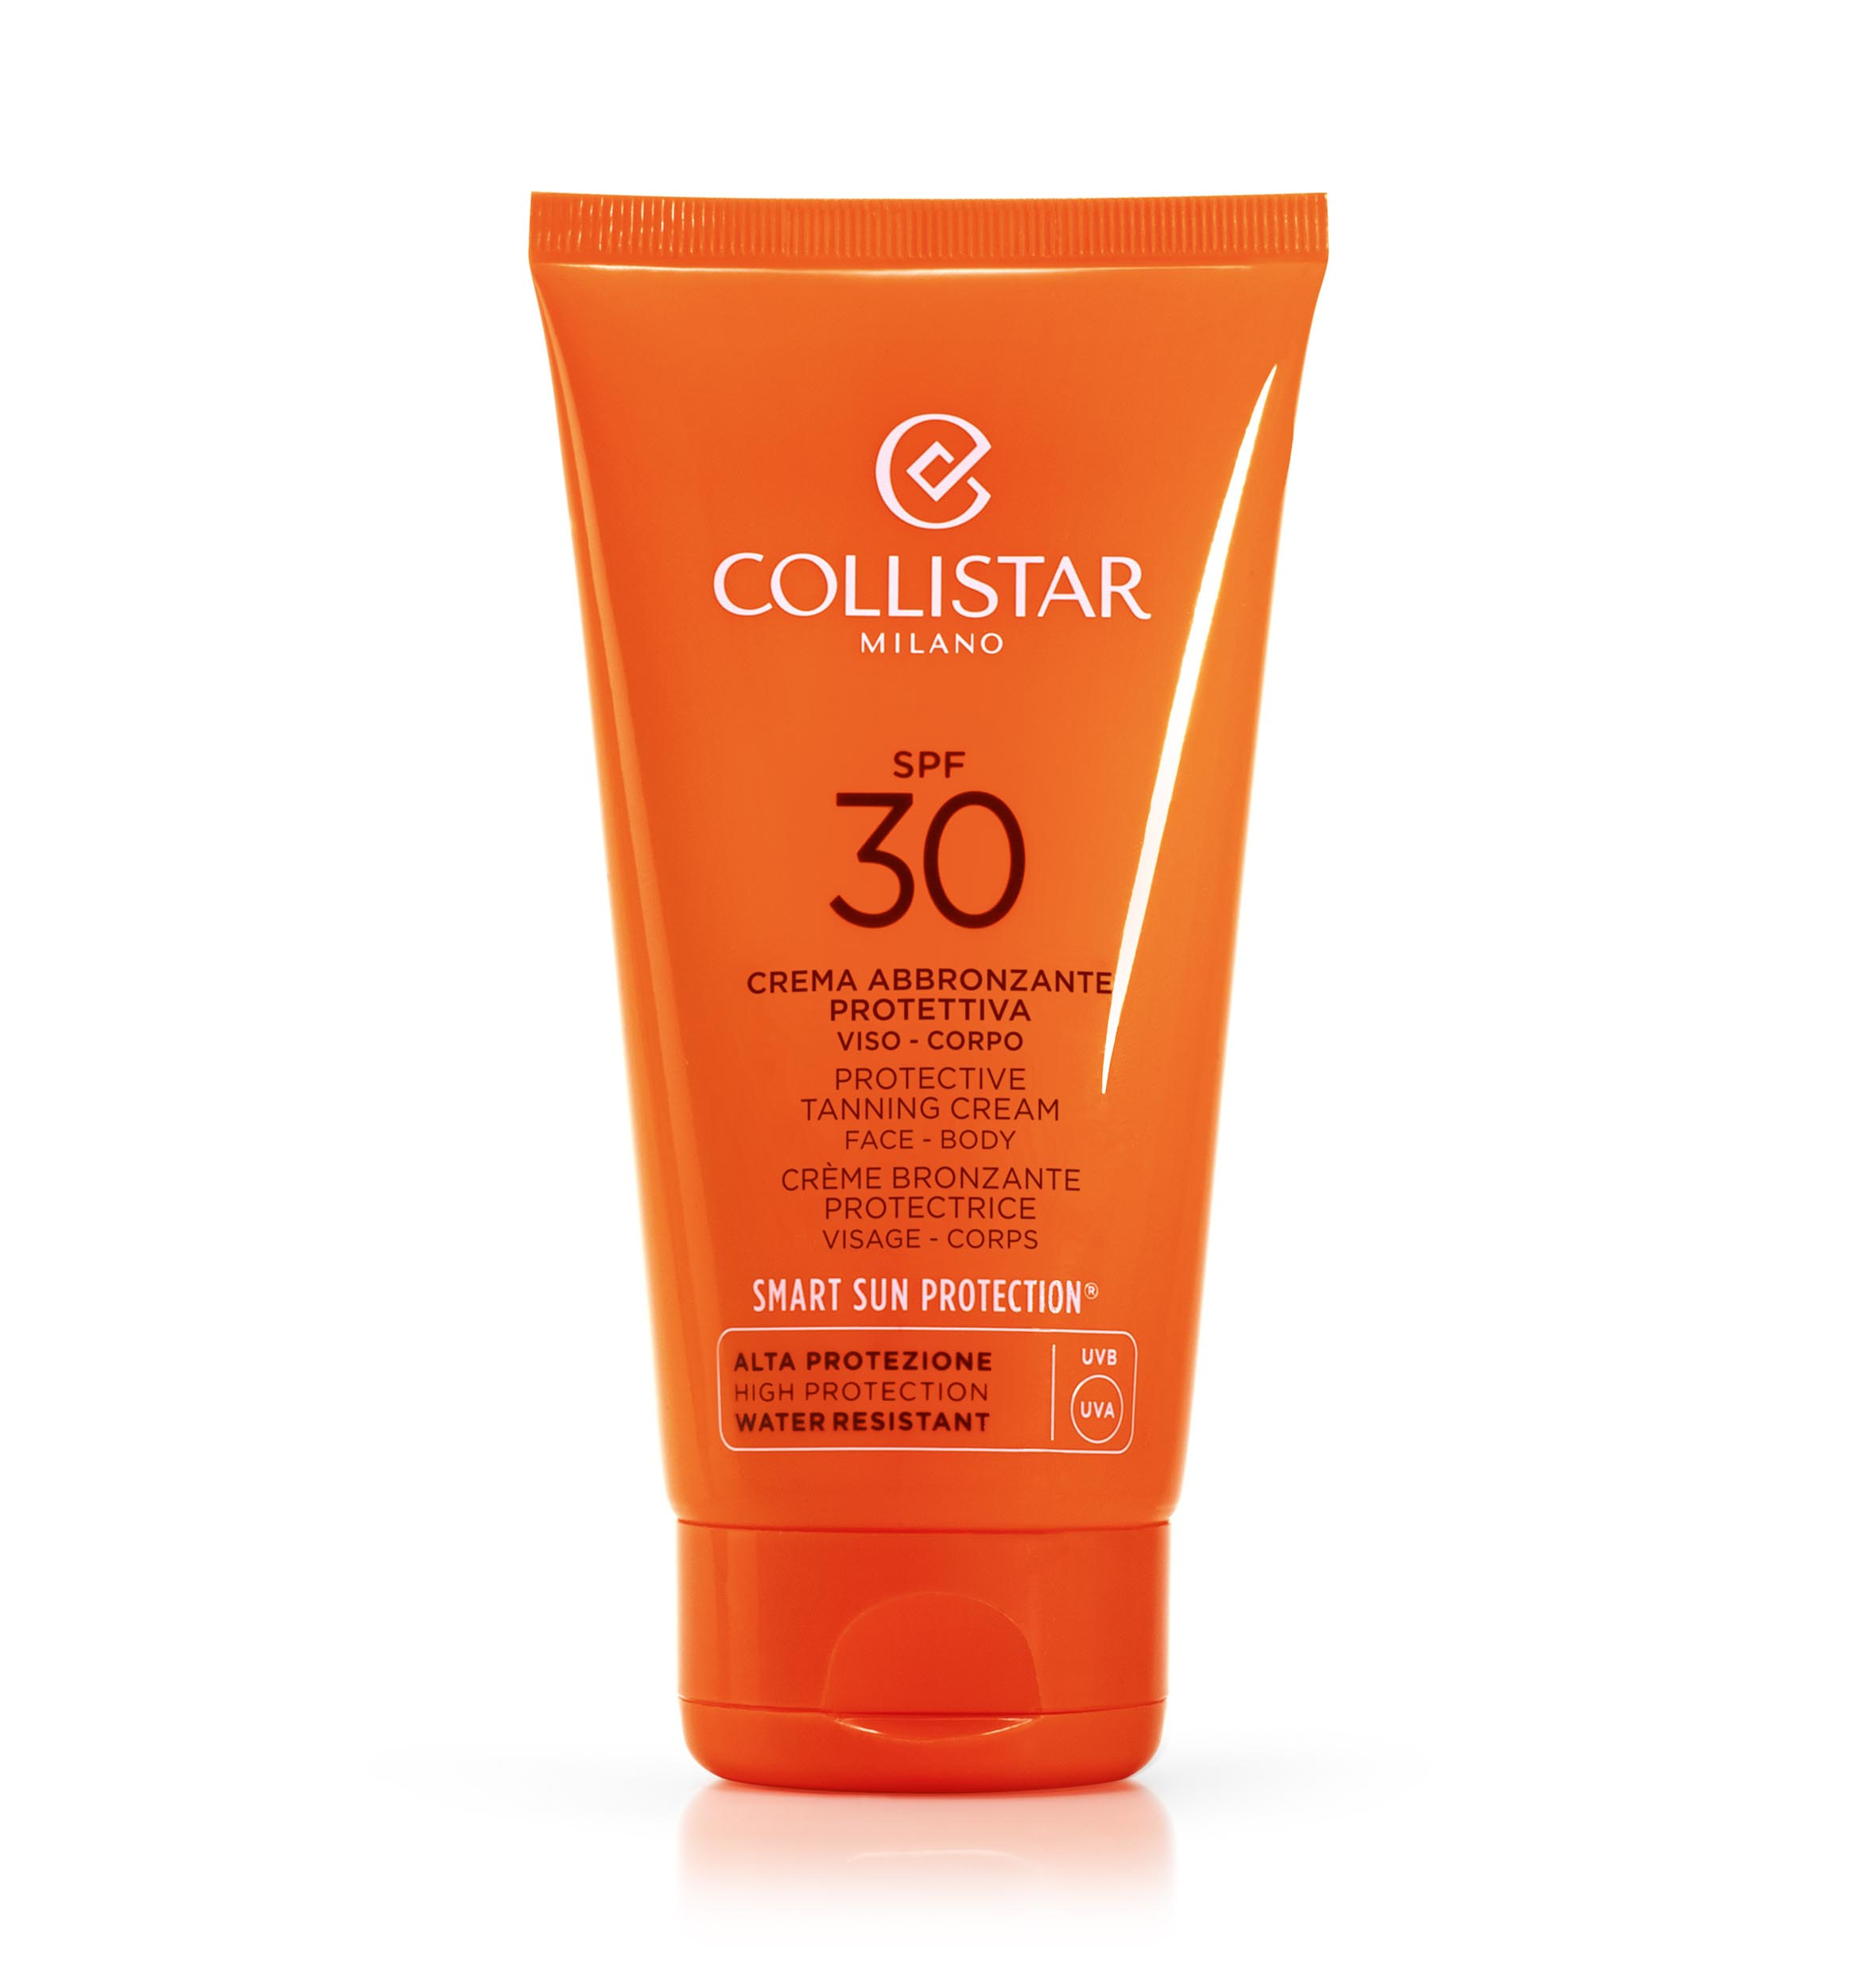 ULTRA PROTECTION TANNING CREAM FACE - BODY SPF 30 by Collistar